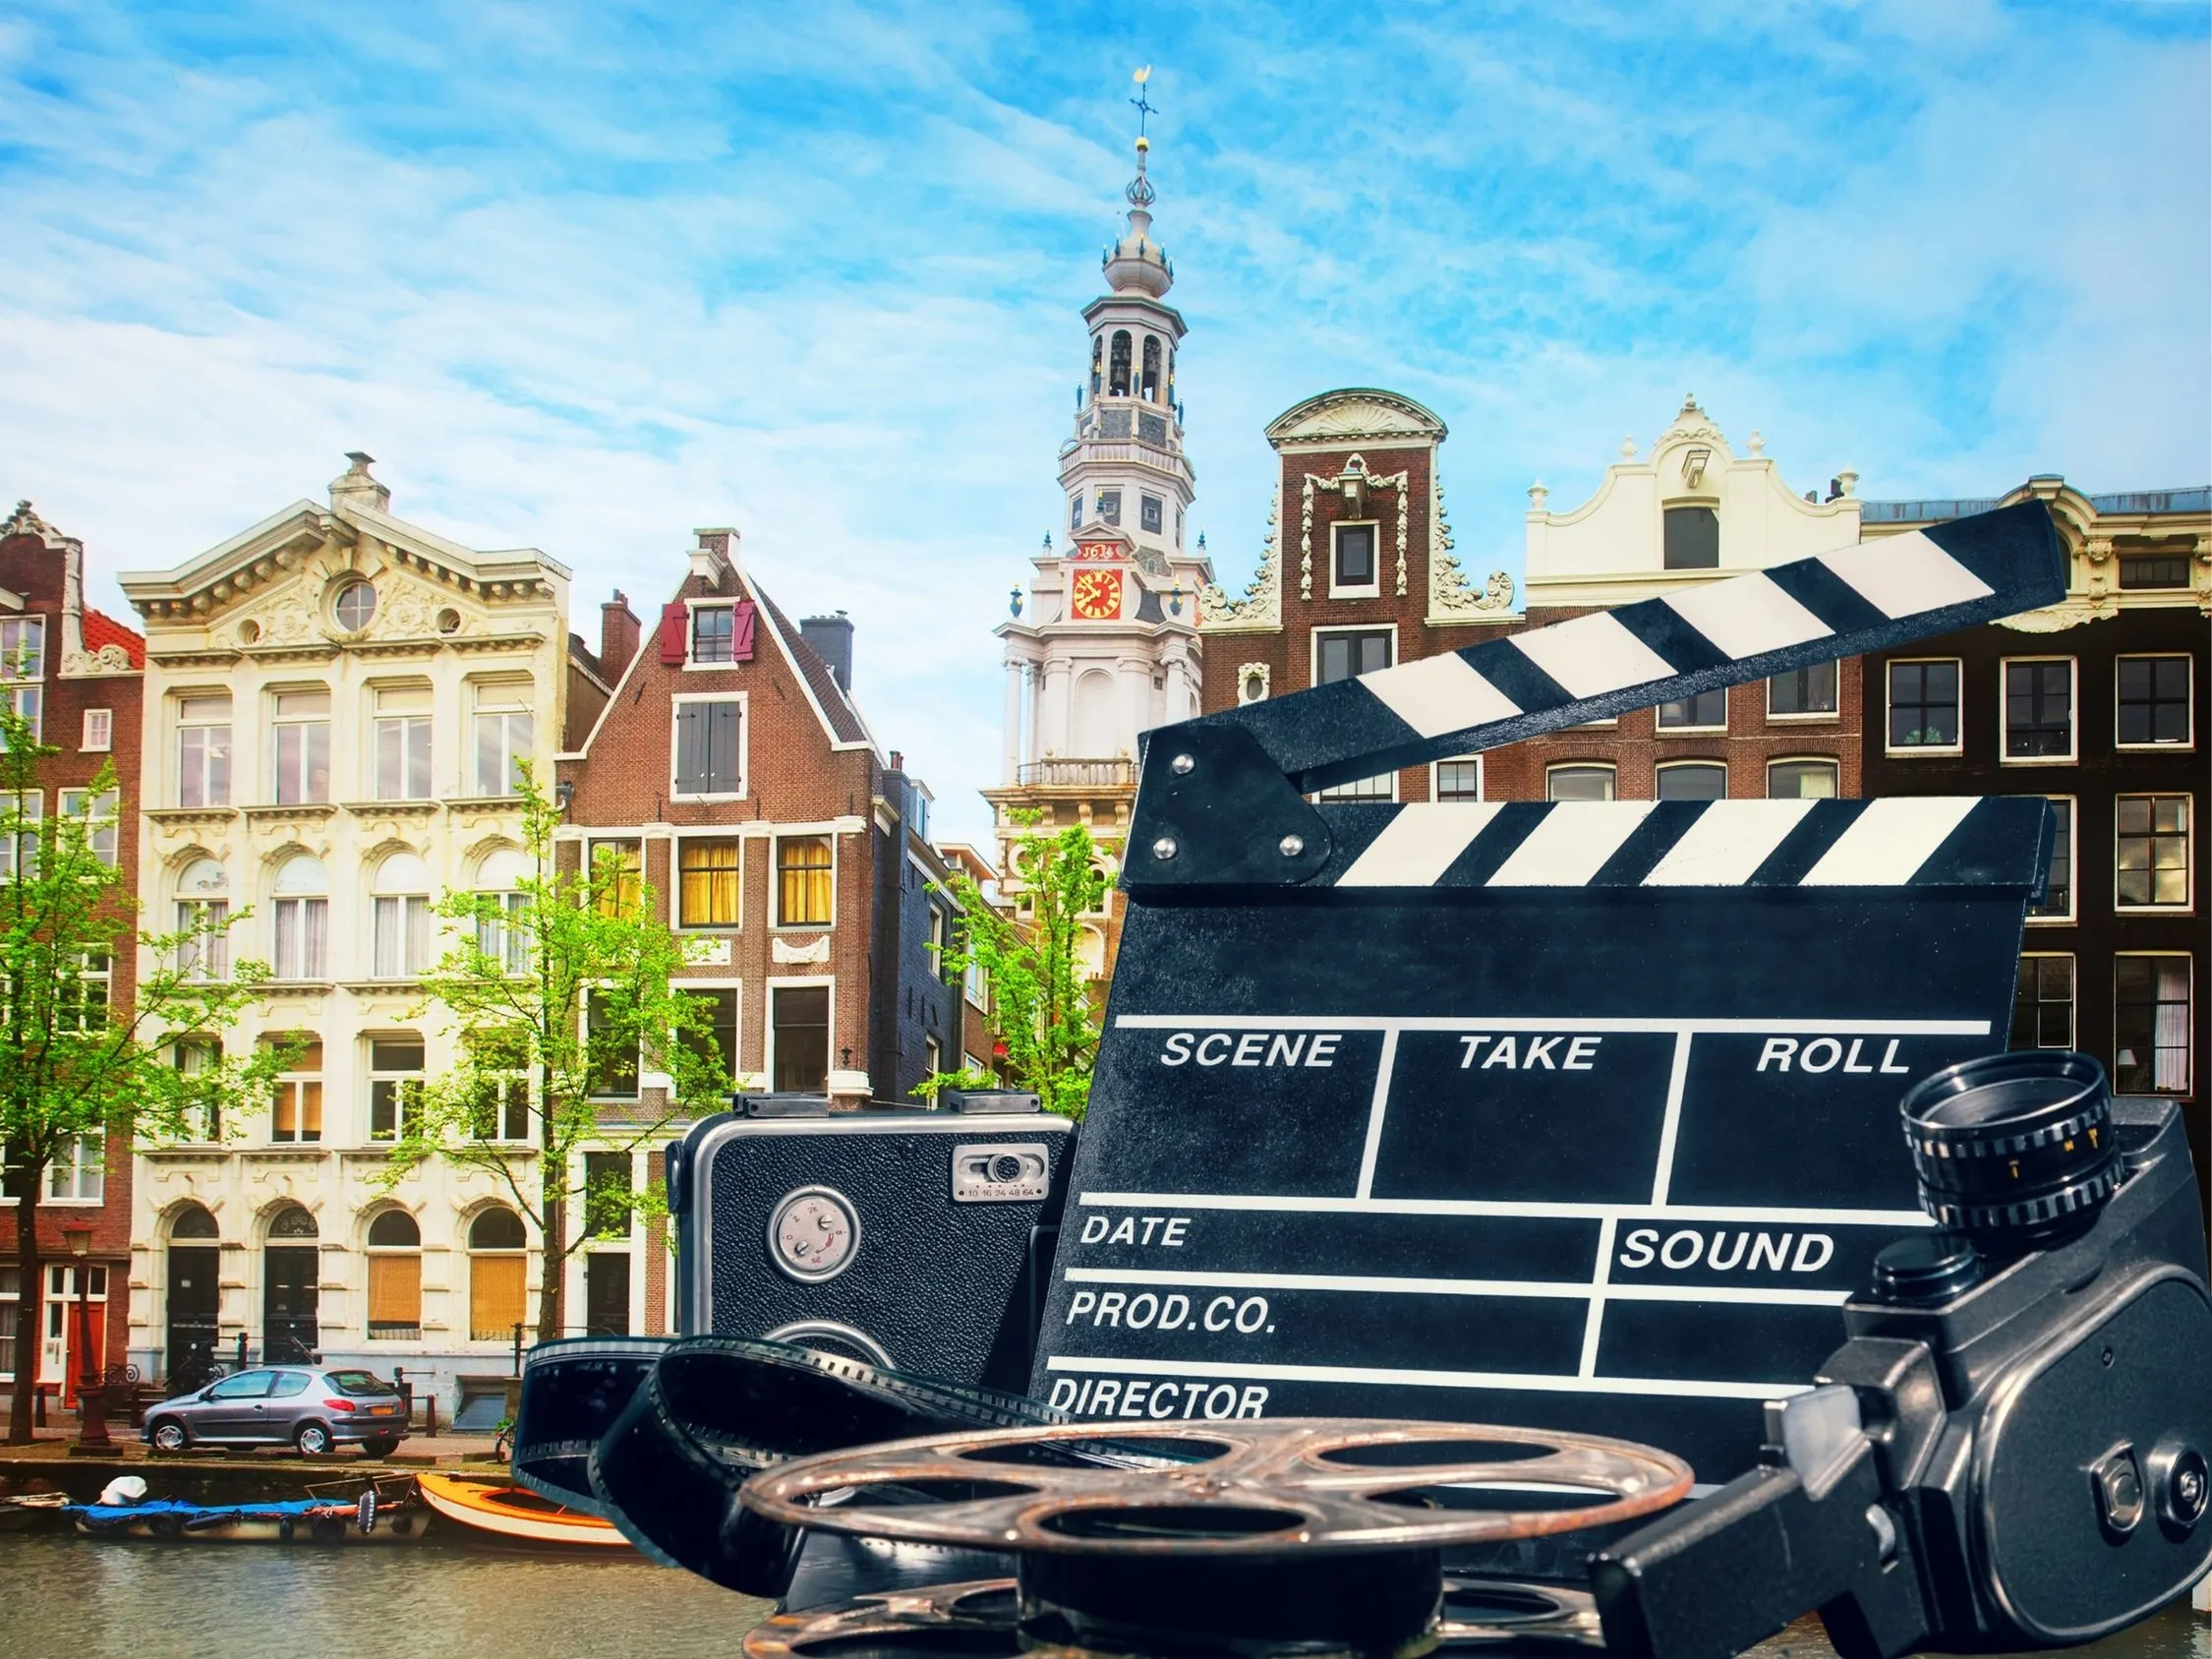 10 Extraordinary Movies Set In The Netherlands That Will Inspire You To Visit!